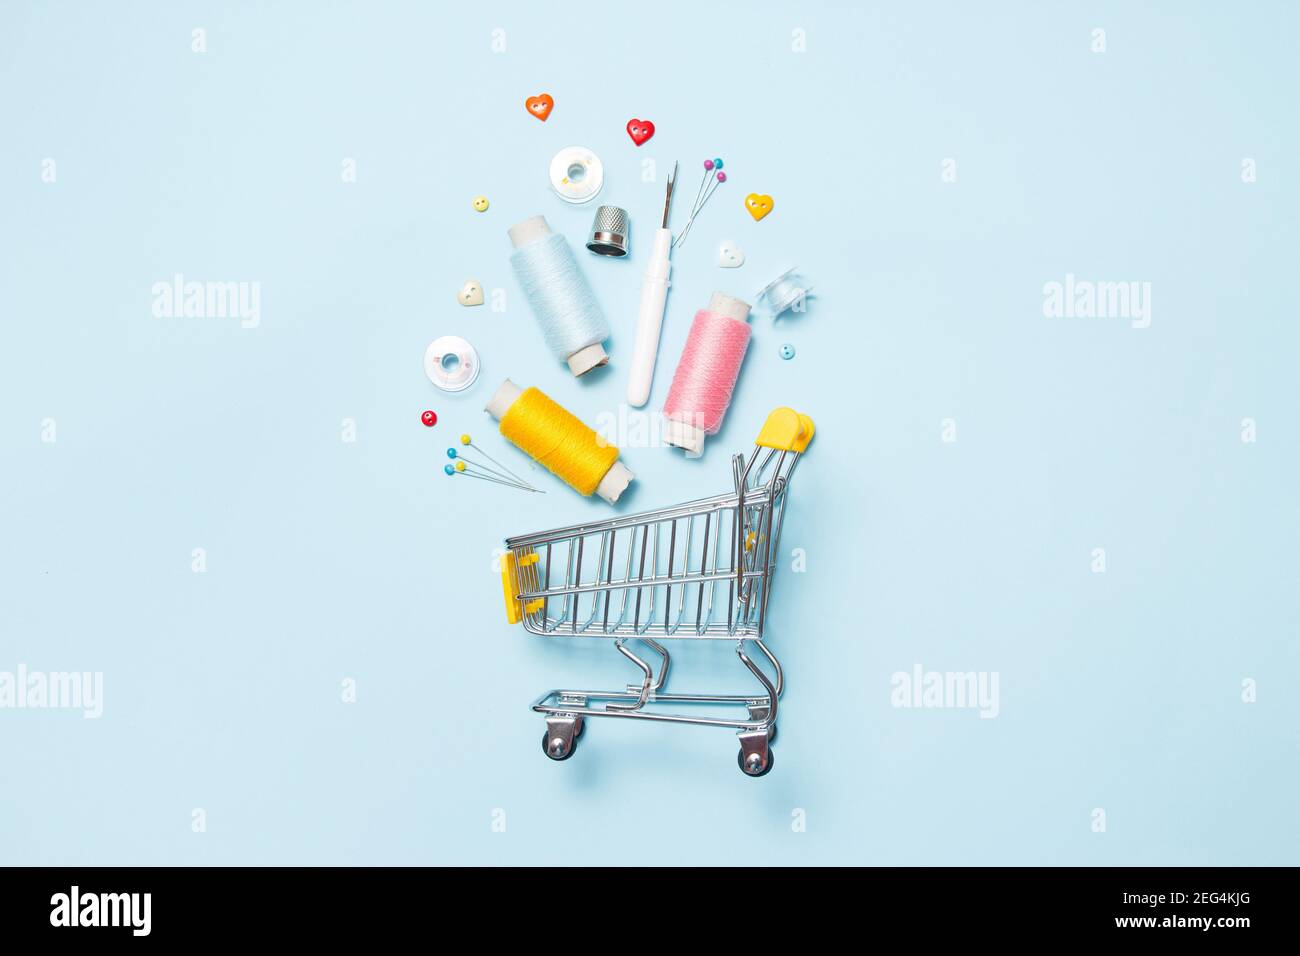 Supermarket cart with sewing accessories on blue background, stitching, embroidery. Space for text, flat lay, top view. Sew background. Sale concept. Stock Photo